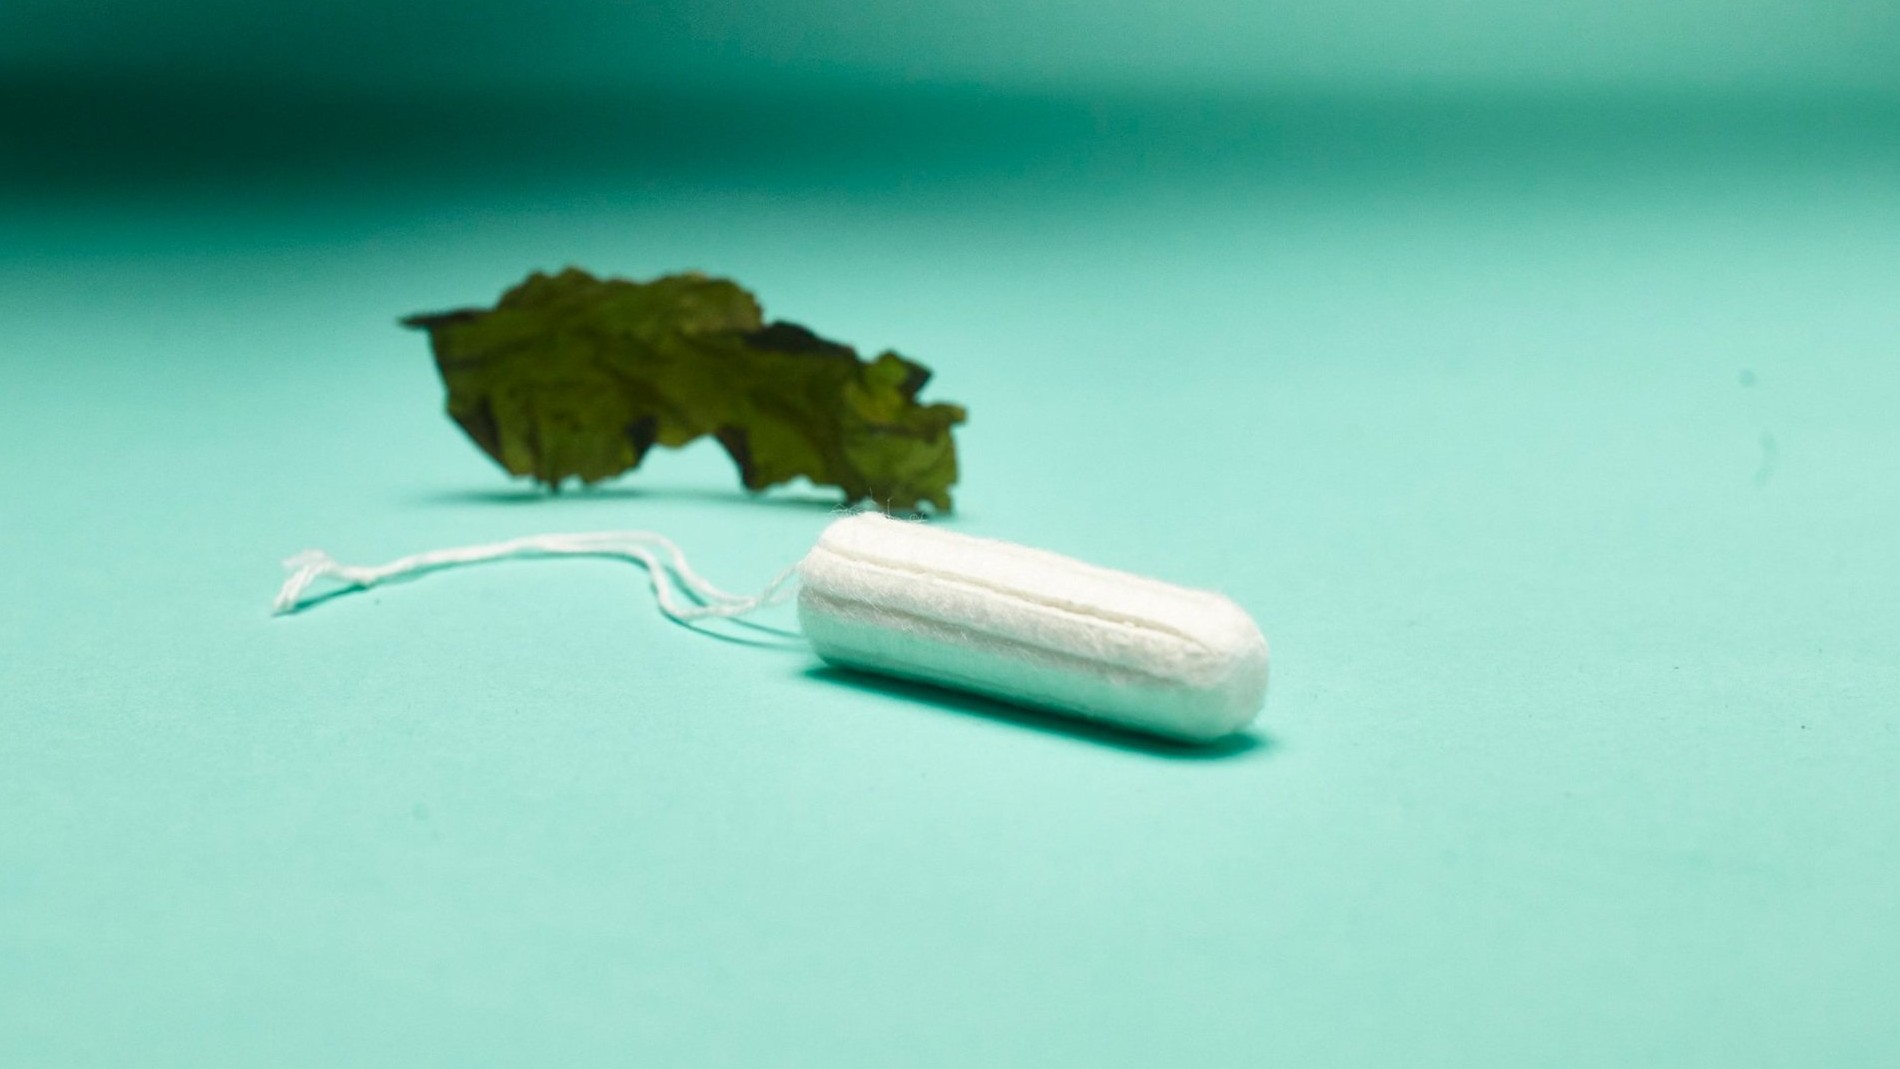 German startup makes biodegradable tampons from seaweed